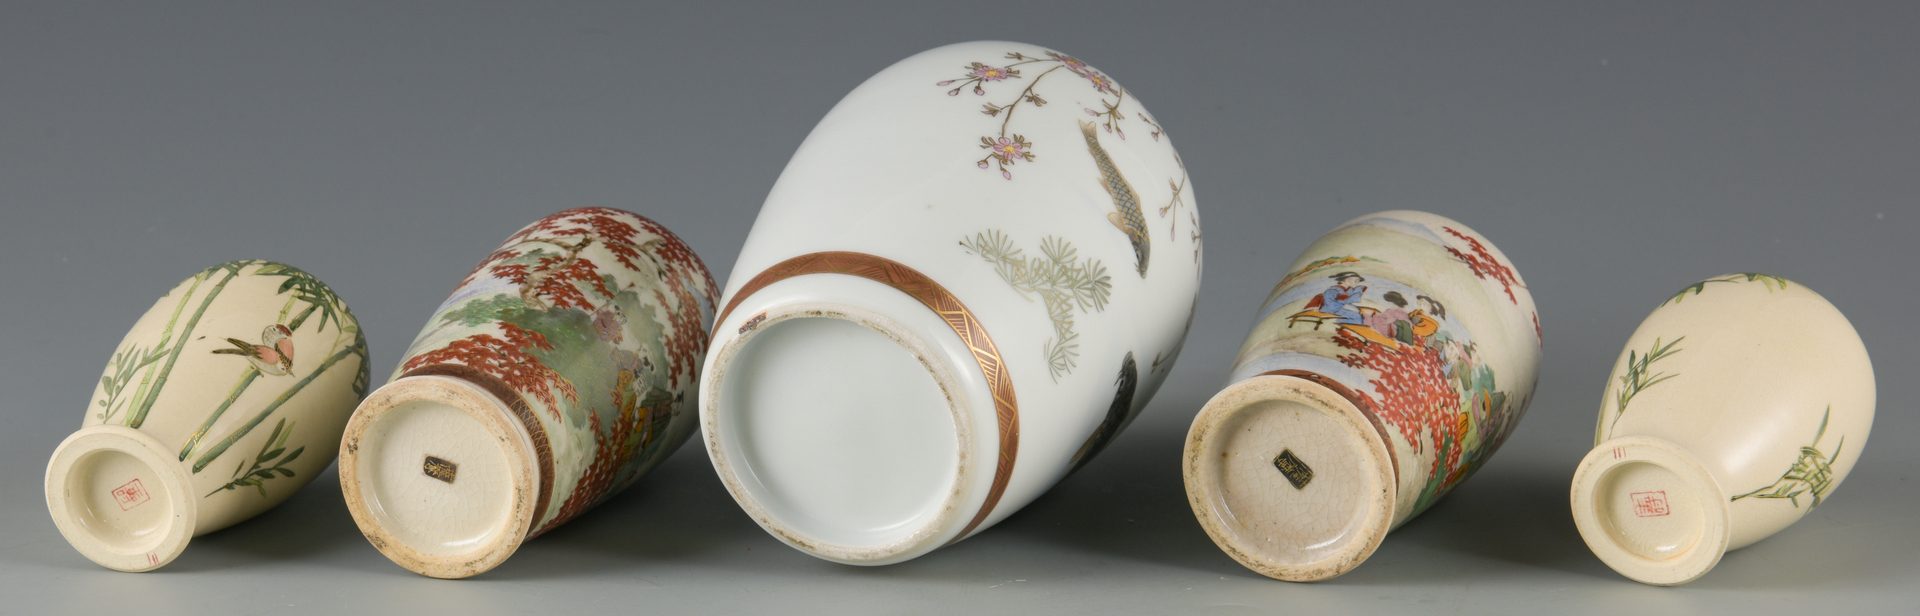 Lot 593: Japanese and Chinese Porcelain, 18 items